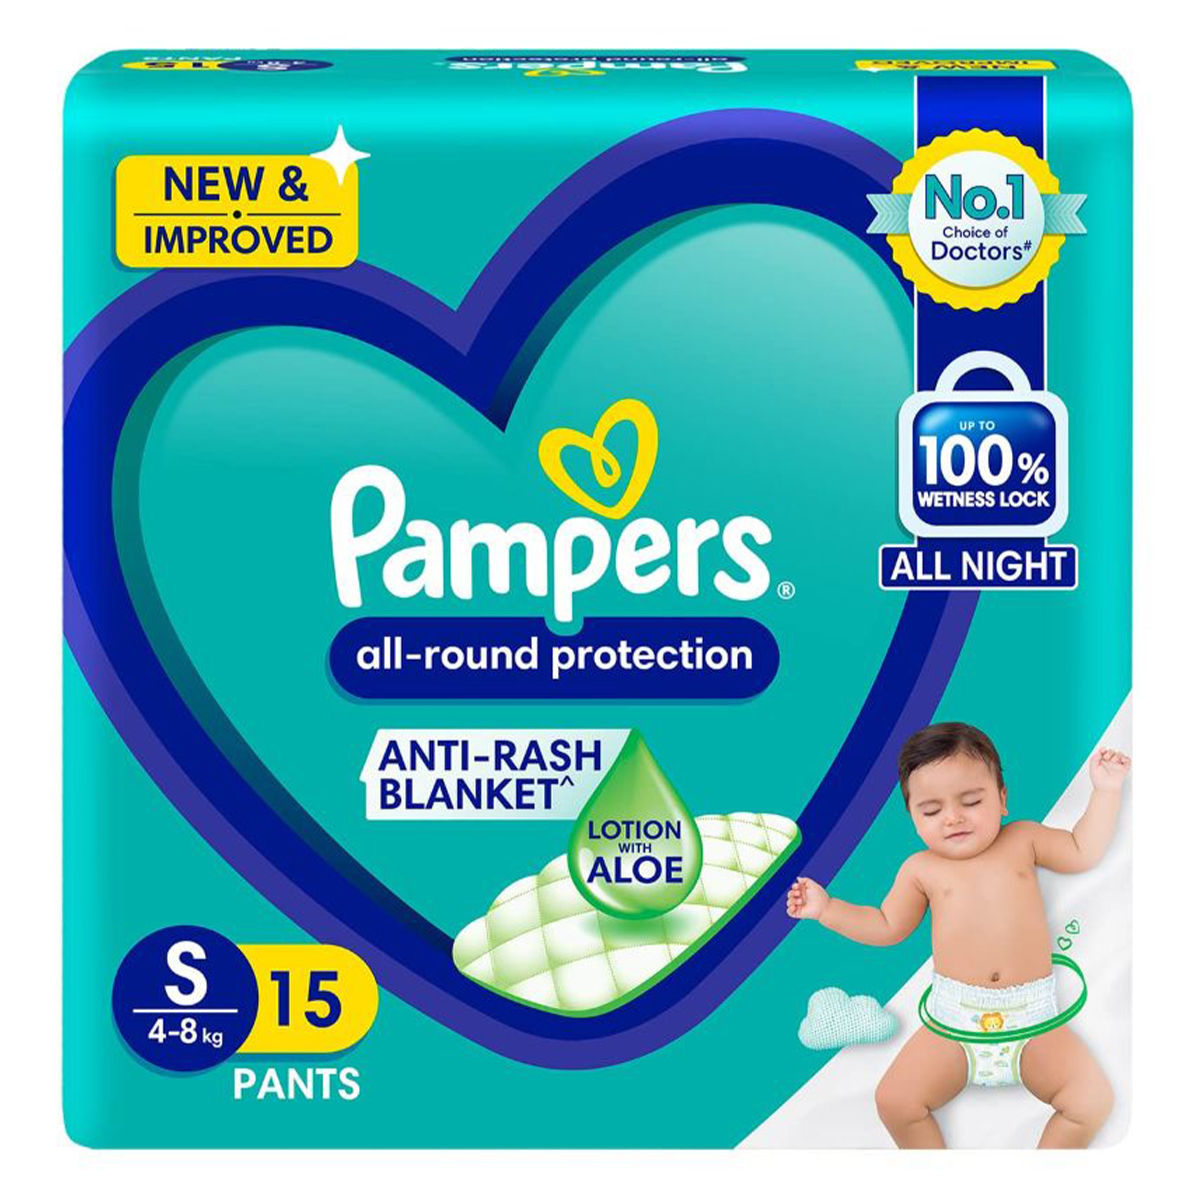 Buy Pampers All-Round Protection Diaper Pants Small, 15 Count Online